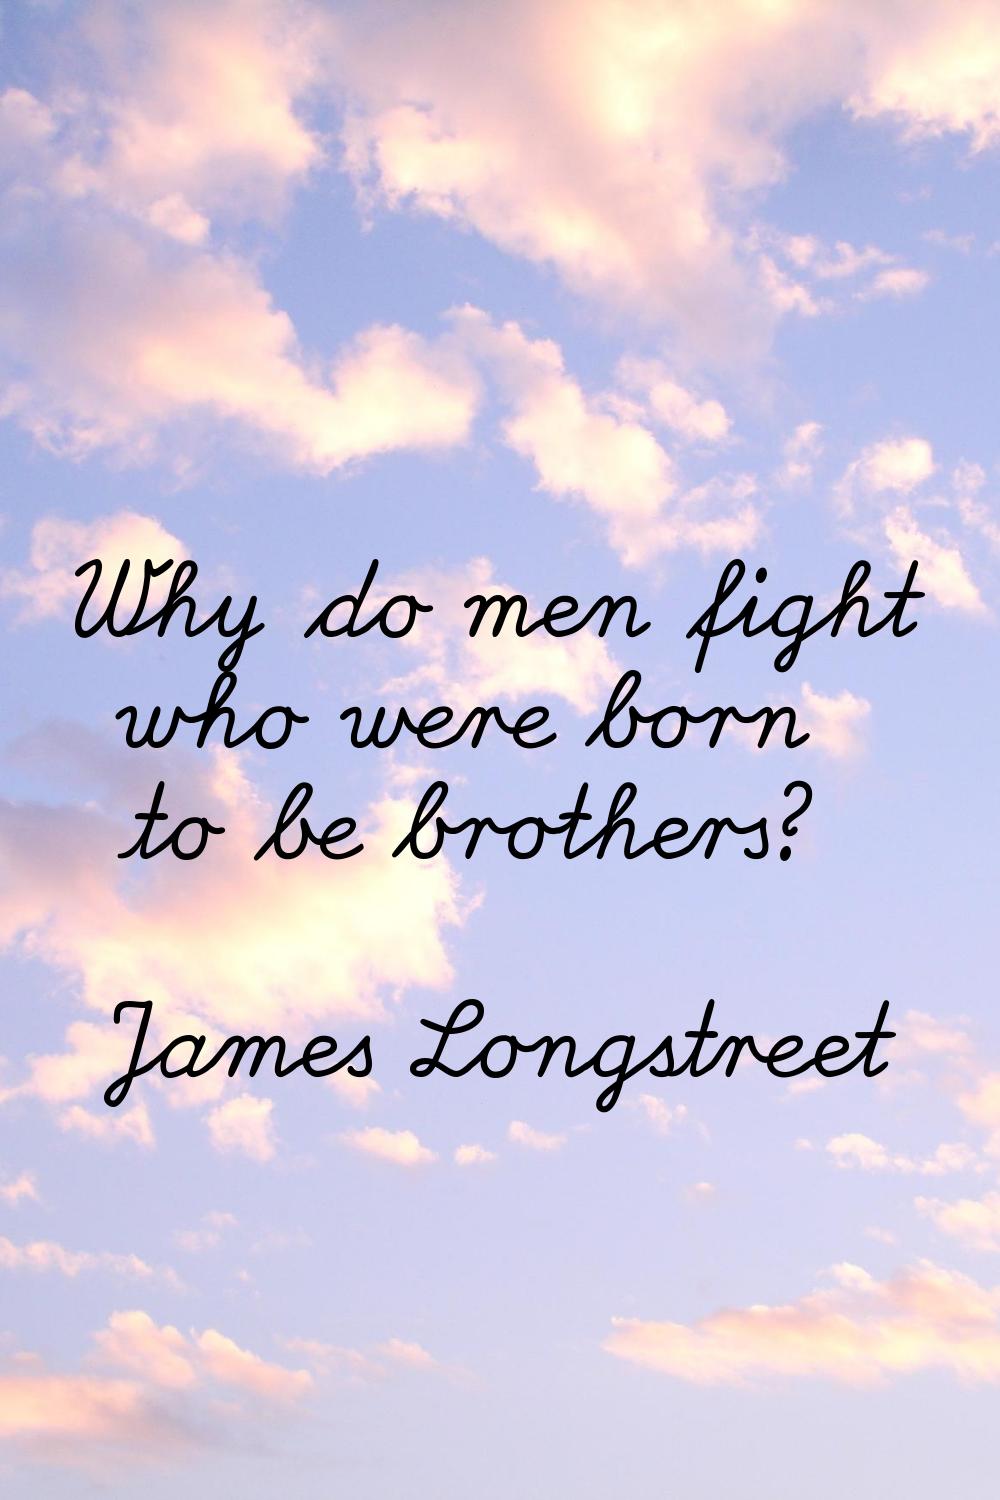 Why do men fight who were born to be brothers?